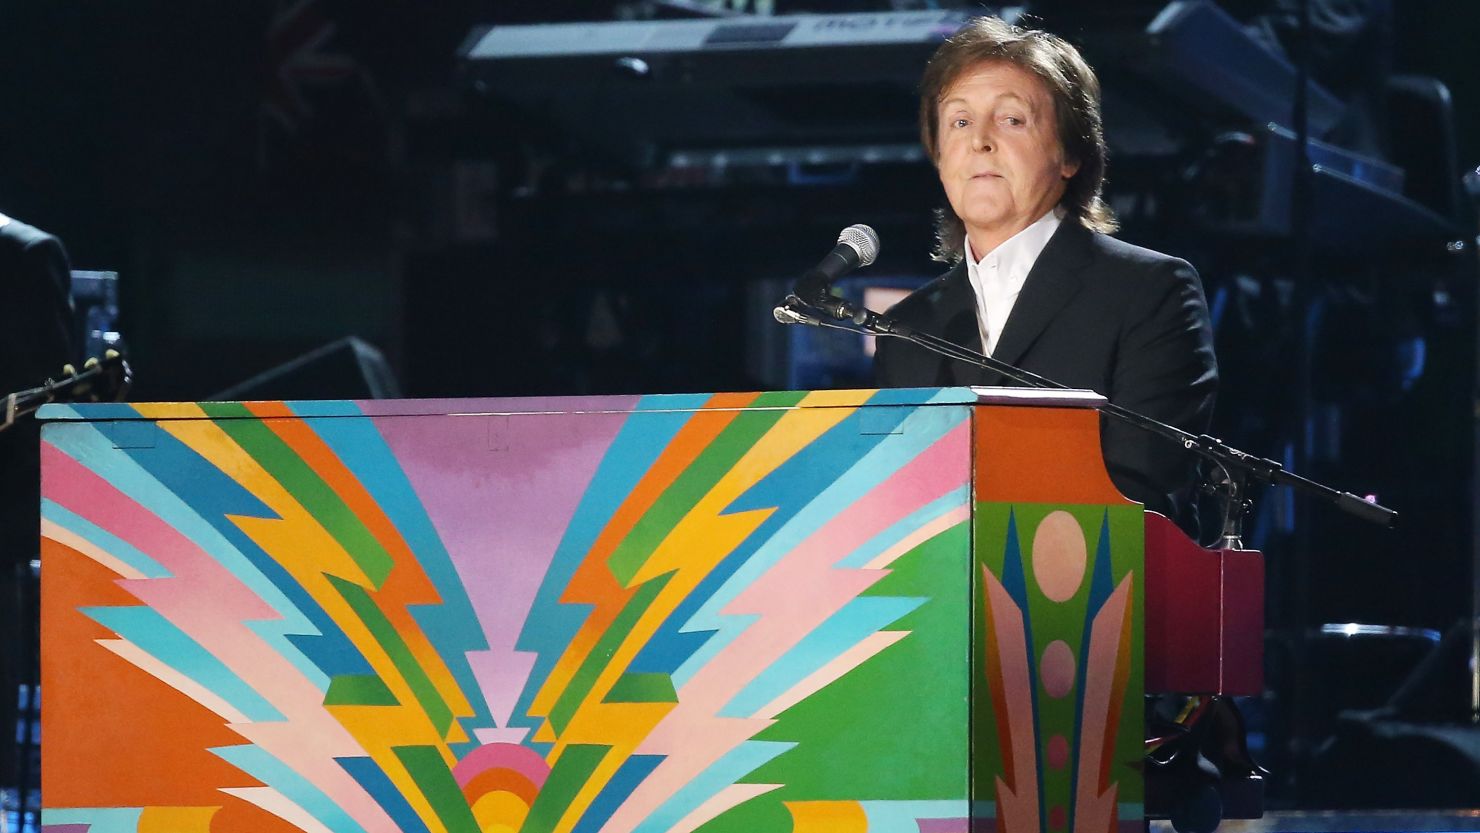 Paul McCartney will be out and about performing to promote his album in the next few months.  